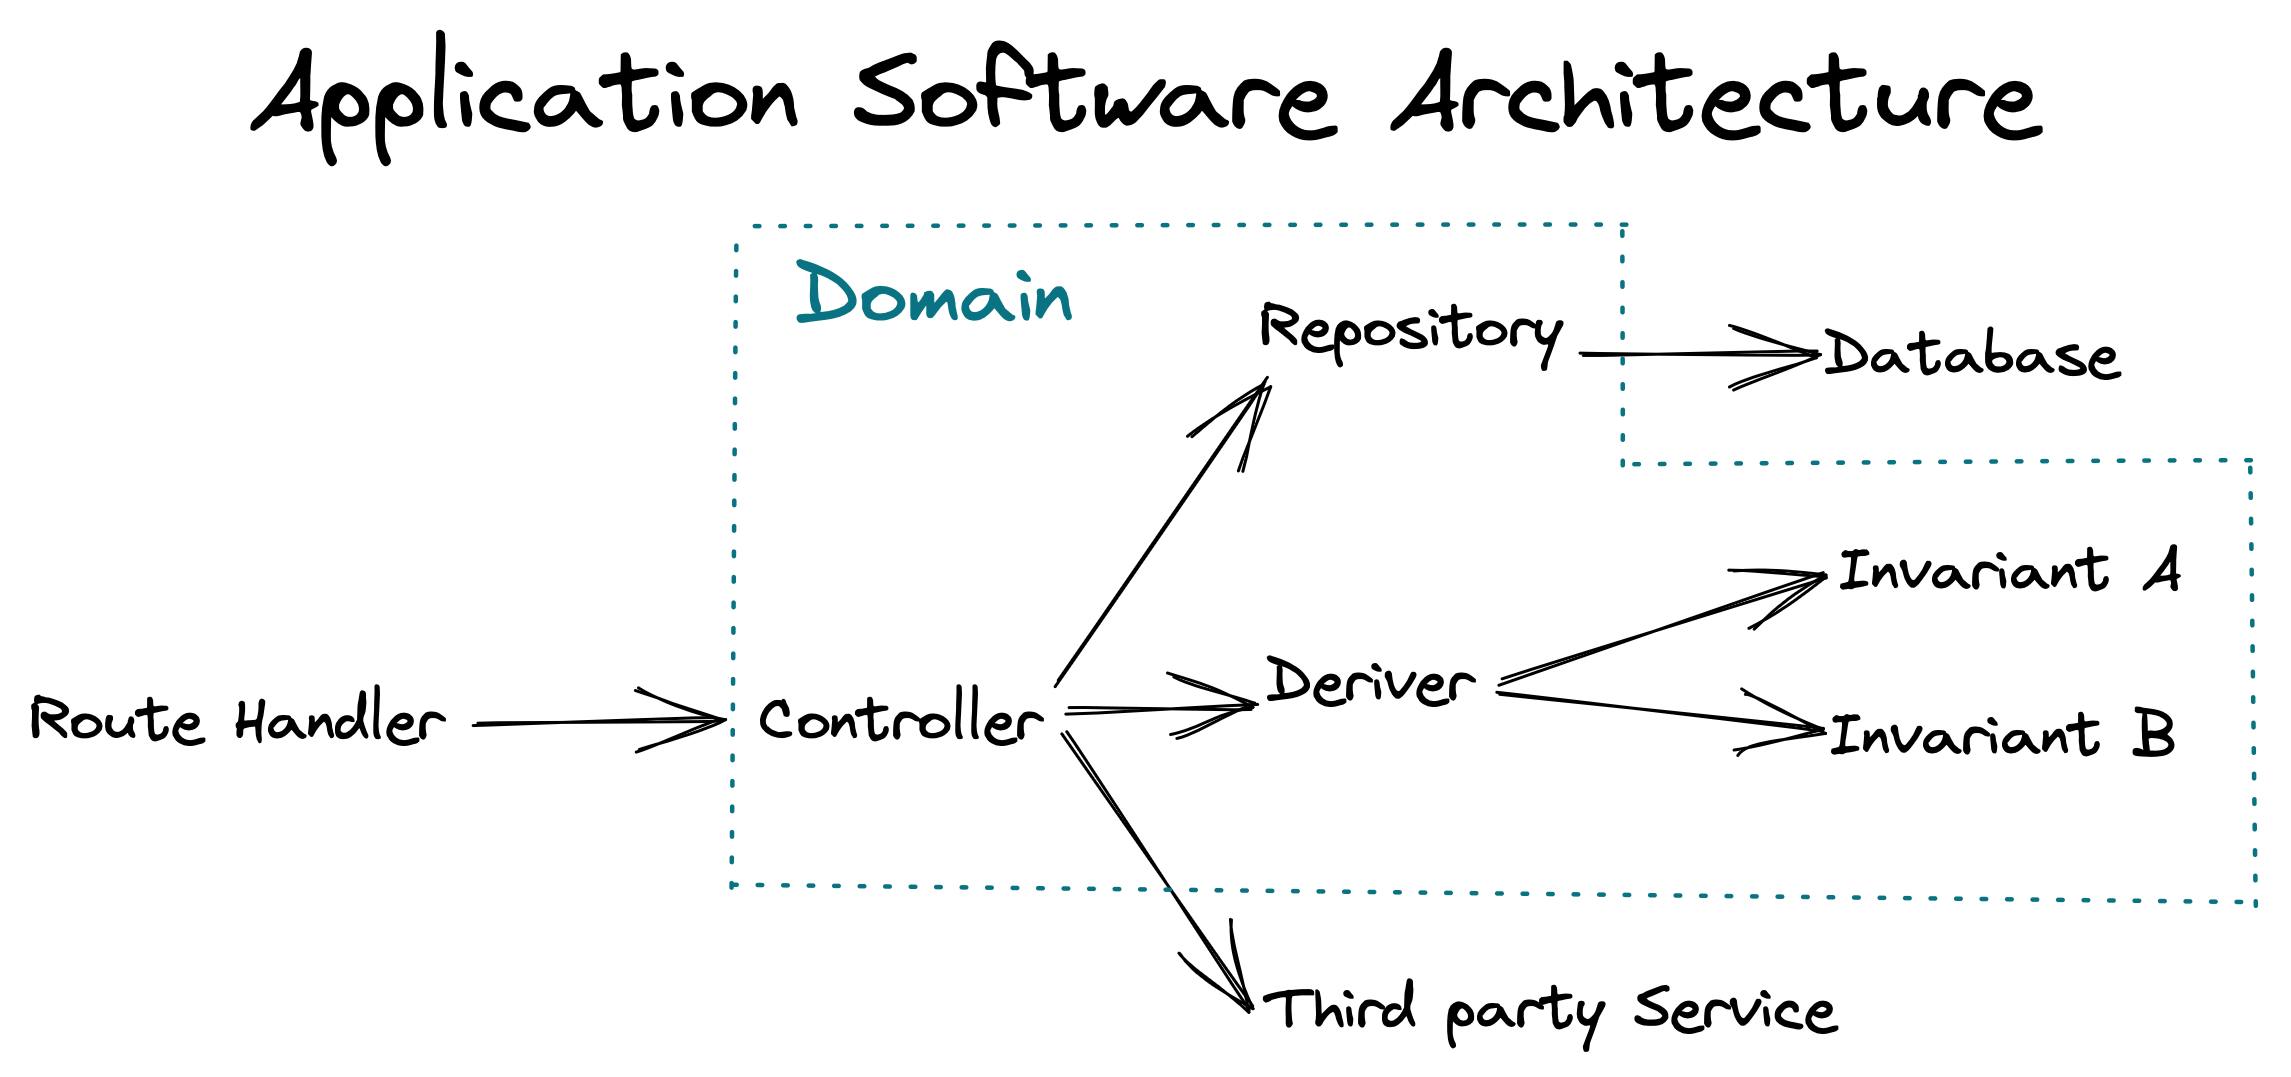 FDDD Application software Architecture.excalidraw.png